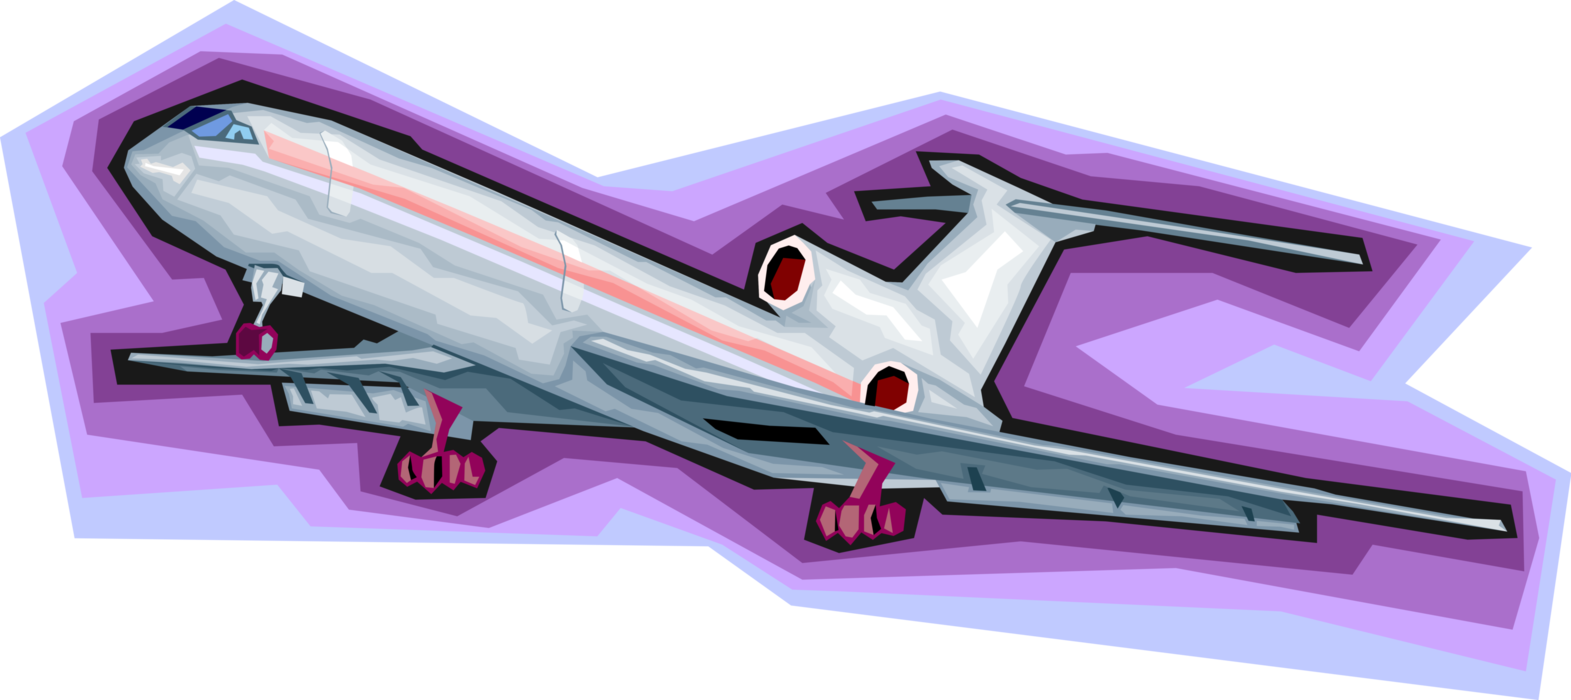 Vector Illustration of Commercial Passenger Jet Airplane Taking Off from Airport Runway